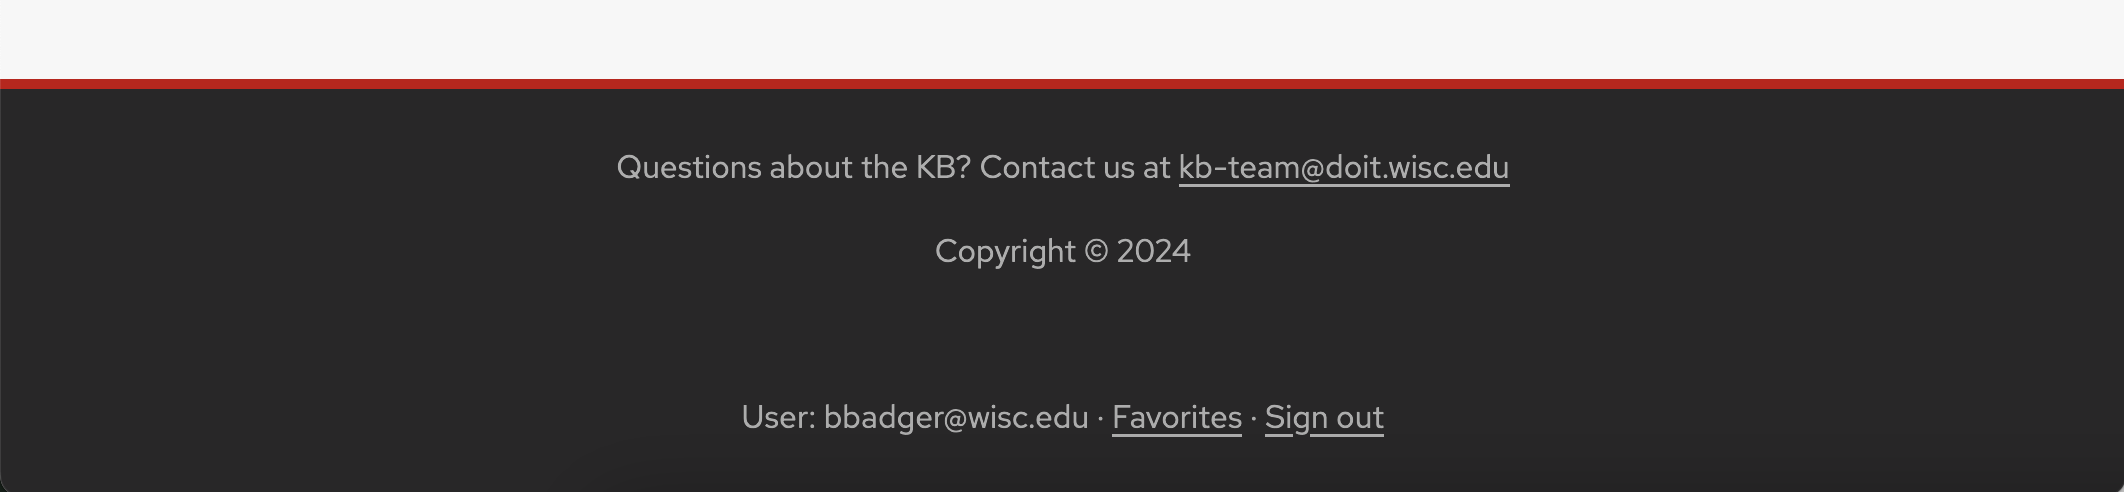 The footer is at the very bottom of the site. On the UW Demo & Training internal site, it contains an email link to contact the KB Team, a copyright line, and a line showing that the current user is bbadger@wisc.edu, followed by links to Favorites and Sign Out.